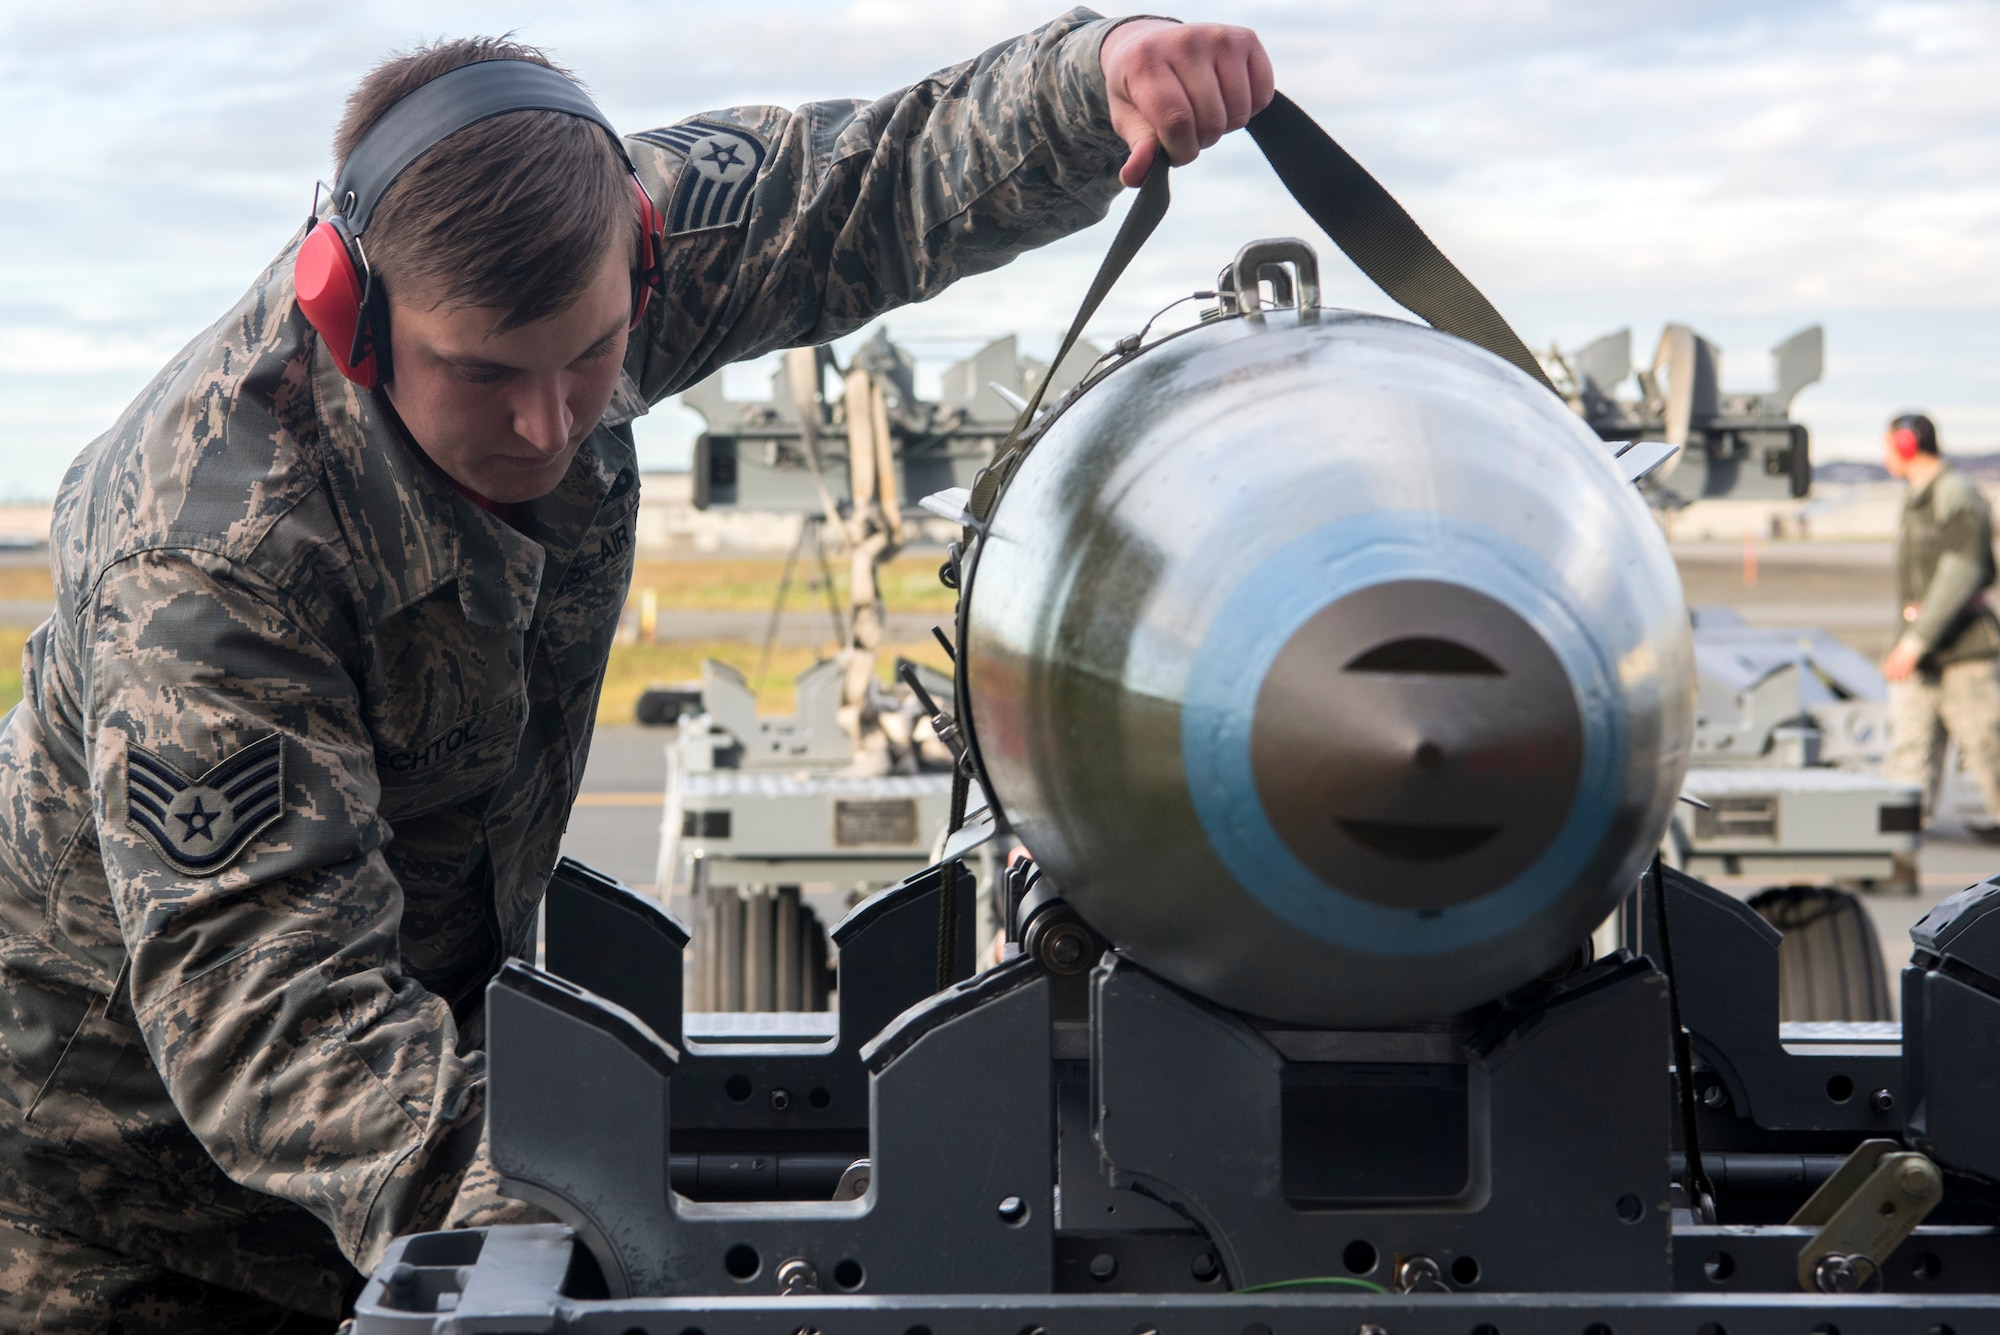 U.S. Air Force Staff Sgt. Taylor Bechtol, a 90th Aircraft Maintenance Unit weapons load crew chief, loosens the straps on a GBU-32 Joint Direct Attack Munition (JDAM) during the quarterly load competition at Joint Base Elmendorf-Richardson, Alaska, Oct. 26, 2018. The JDAM is used for accurate, adverse weather conventional strikes and weighs approximately 1,000 lbs.